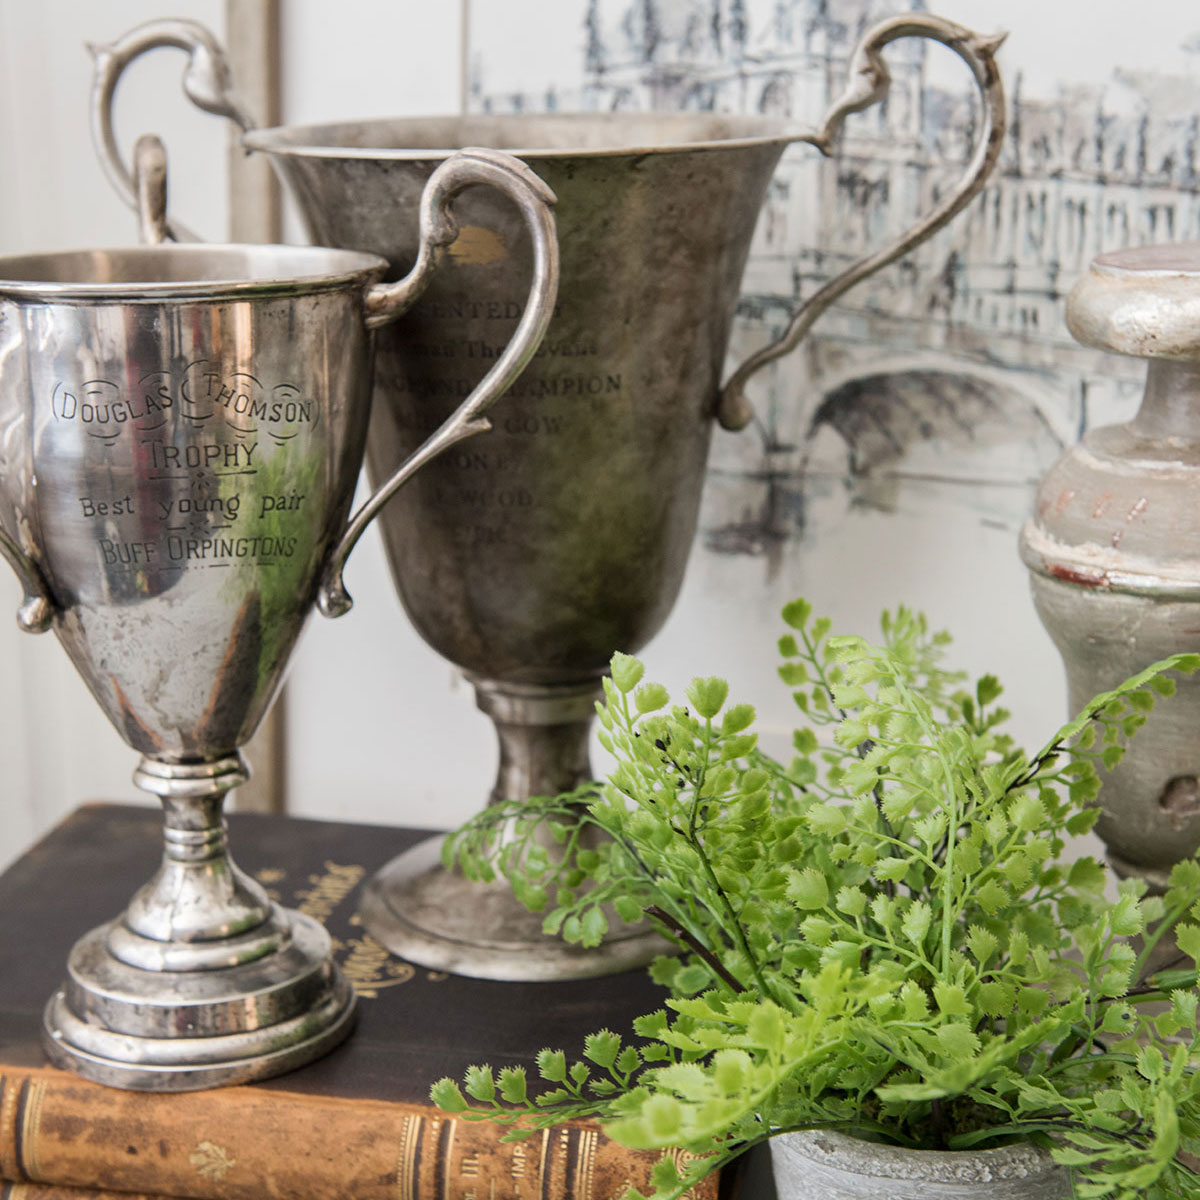 vignette of two vintage silver trophy cups on an old leather book with small green potted fern in front and candlestick in back